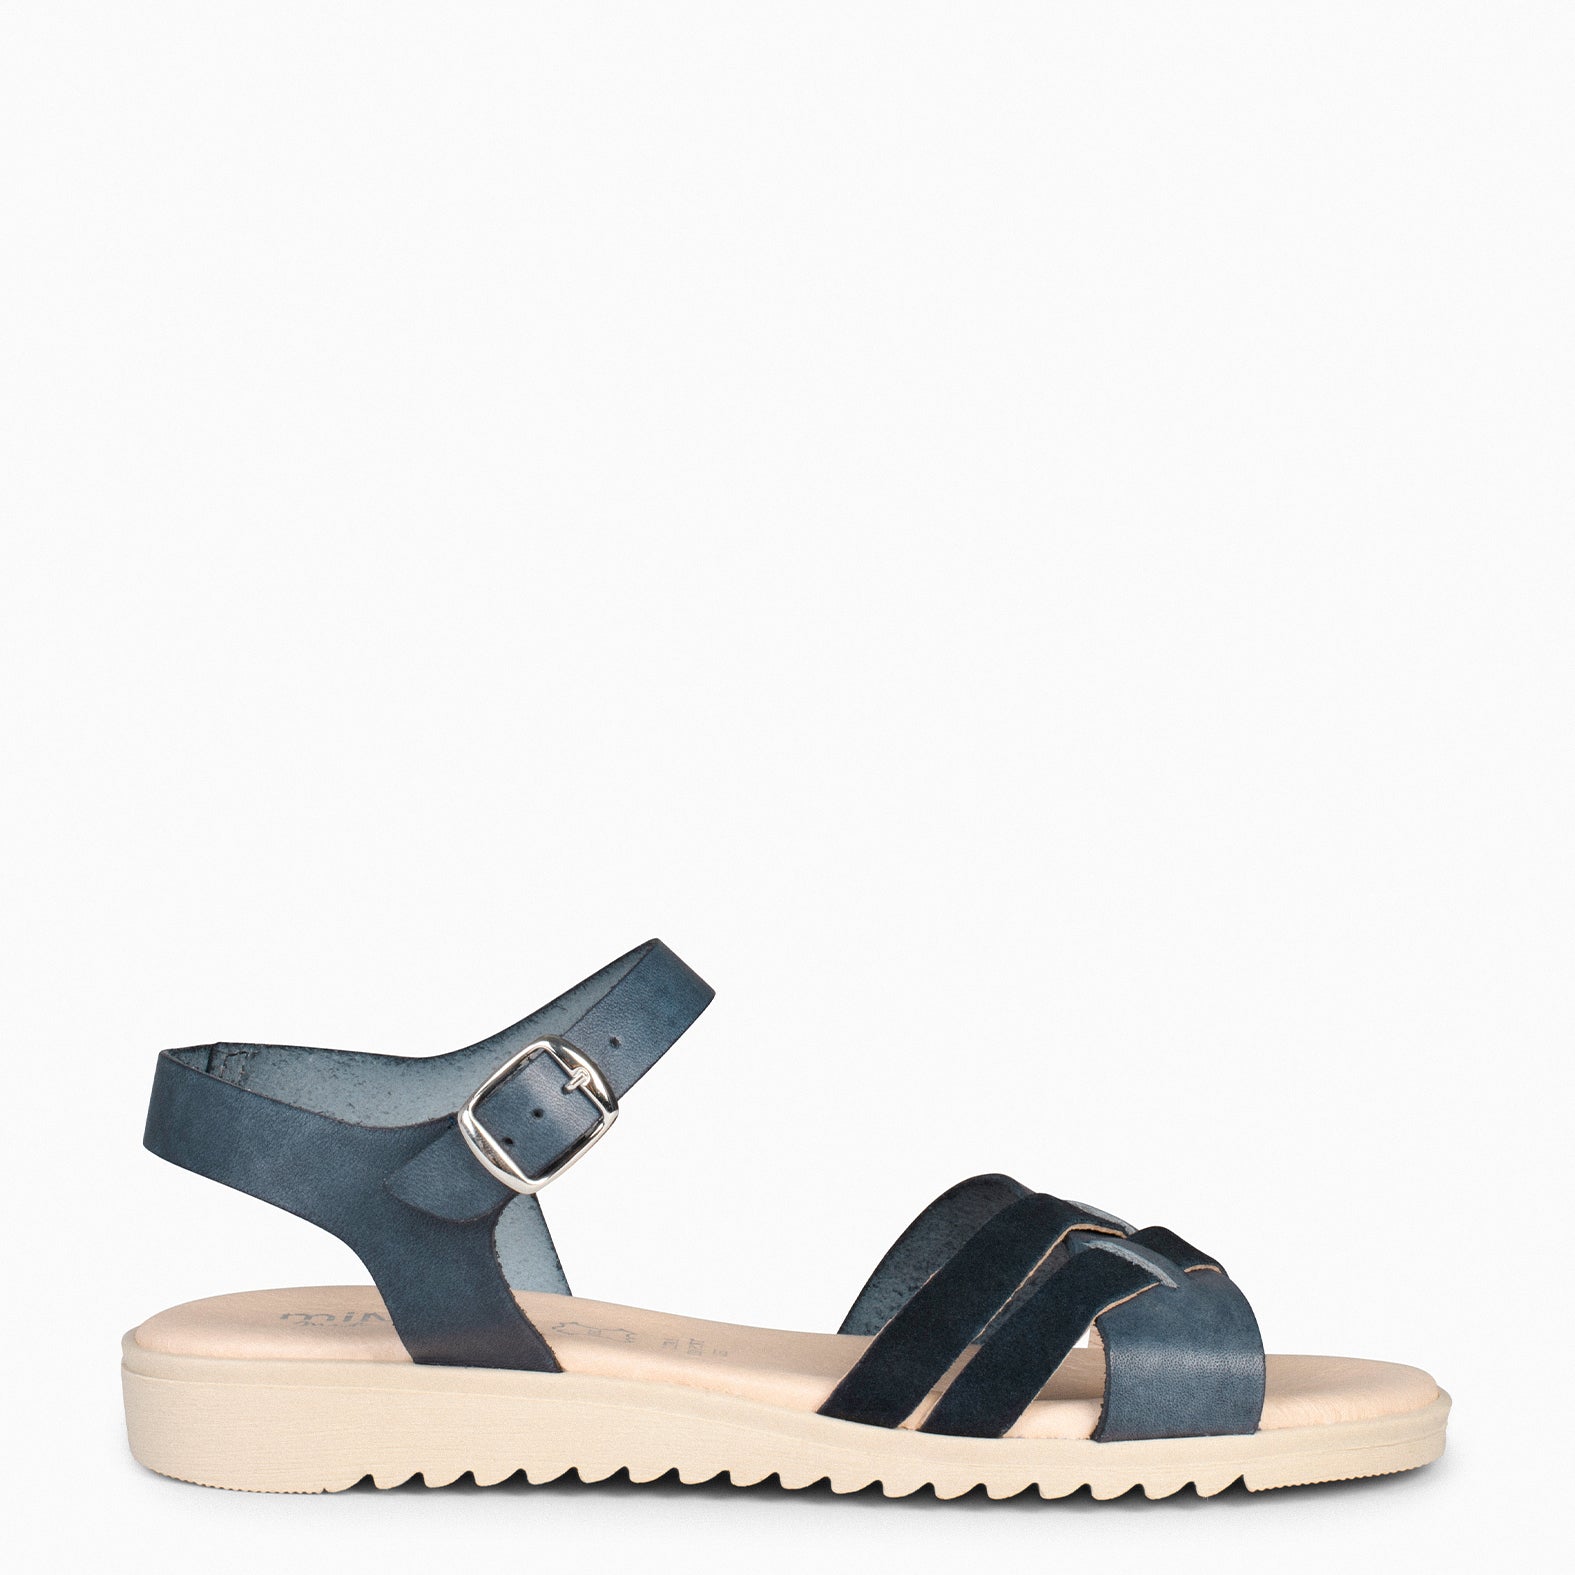 FRESH – NAVY low wedge leather sandals